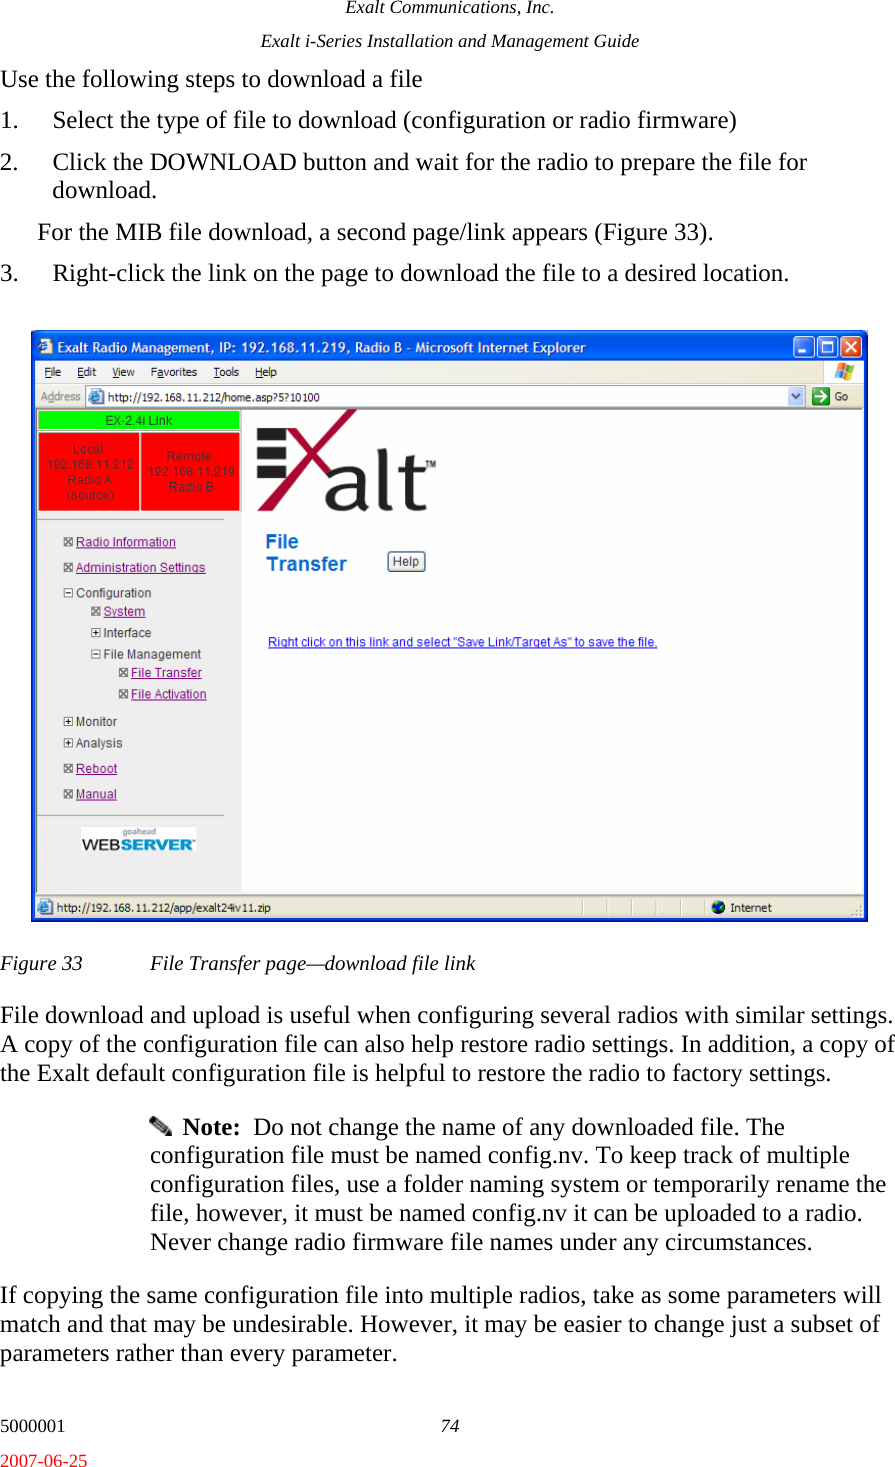 Exalt Communications, Inc. Exalt i-Series Installation and Management Guide 5000001  74 2007-06-25 Use the following steps to download a file 1. Select the type of file to download (configuration or radio firmware) 2. Click the DOWNLOAD button and wait for the radio to prepare the file for download.  For the MIB file download, a second page/link appears (Figure 33).  3. Right-click the link on the page to download the file to a desired location. Figure 33  File Transfer page—download file link File download and upload is useful when configuring several radios with similar settings. A copy of the configuration file can also help restore radio settings. In addition, a copy of the Exalt default configuration file is helpful to restore the radio to factory settings.    Note:  Do not change the name of any downloaded file. The configuration file must be named config.nv. To keep track of multiple configuration files, use a folder naming system or temporarily rename the file, however, it must be named config.nv it can be uploaded to a radio. Never change radio firmware file names under any circumstances. If copying the same configuration file into multiple radios, take as some parameters will match and that may be undesirable. However, it may be easier to change just a subset of parameters rather than every parameter.  